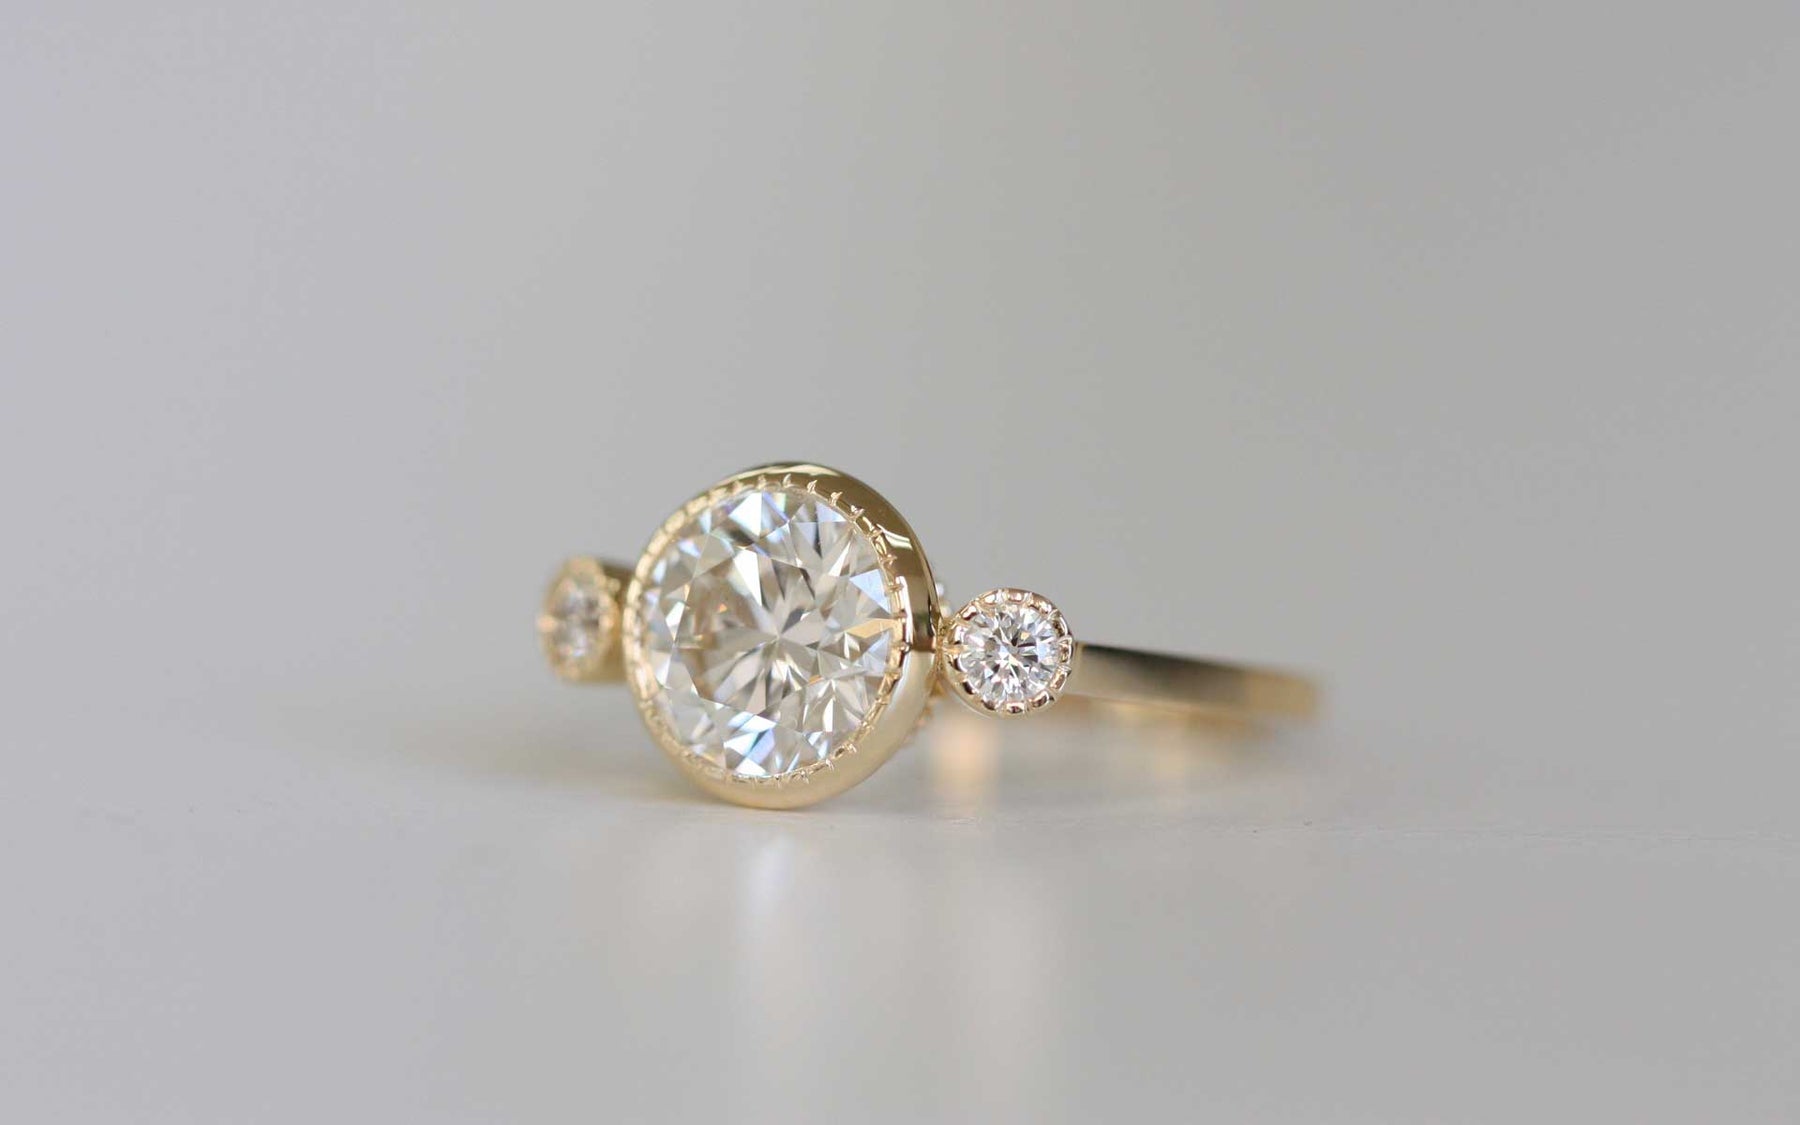 14k yellow gold custom engagement ring with white diamond round cut center stone and two white diamond side stones with milgrain detail